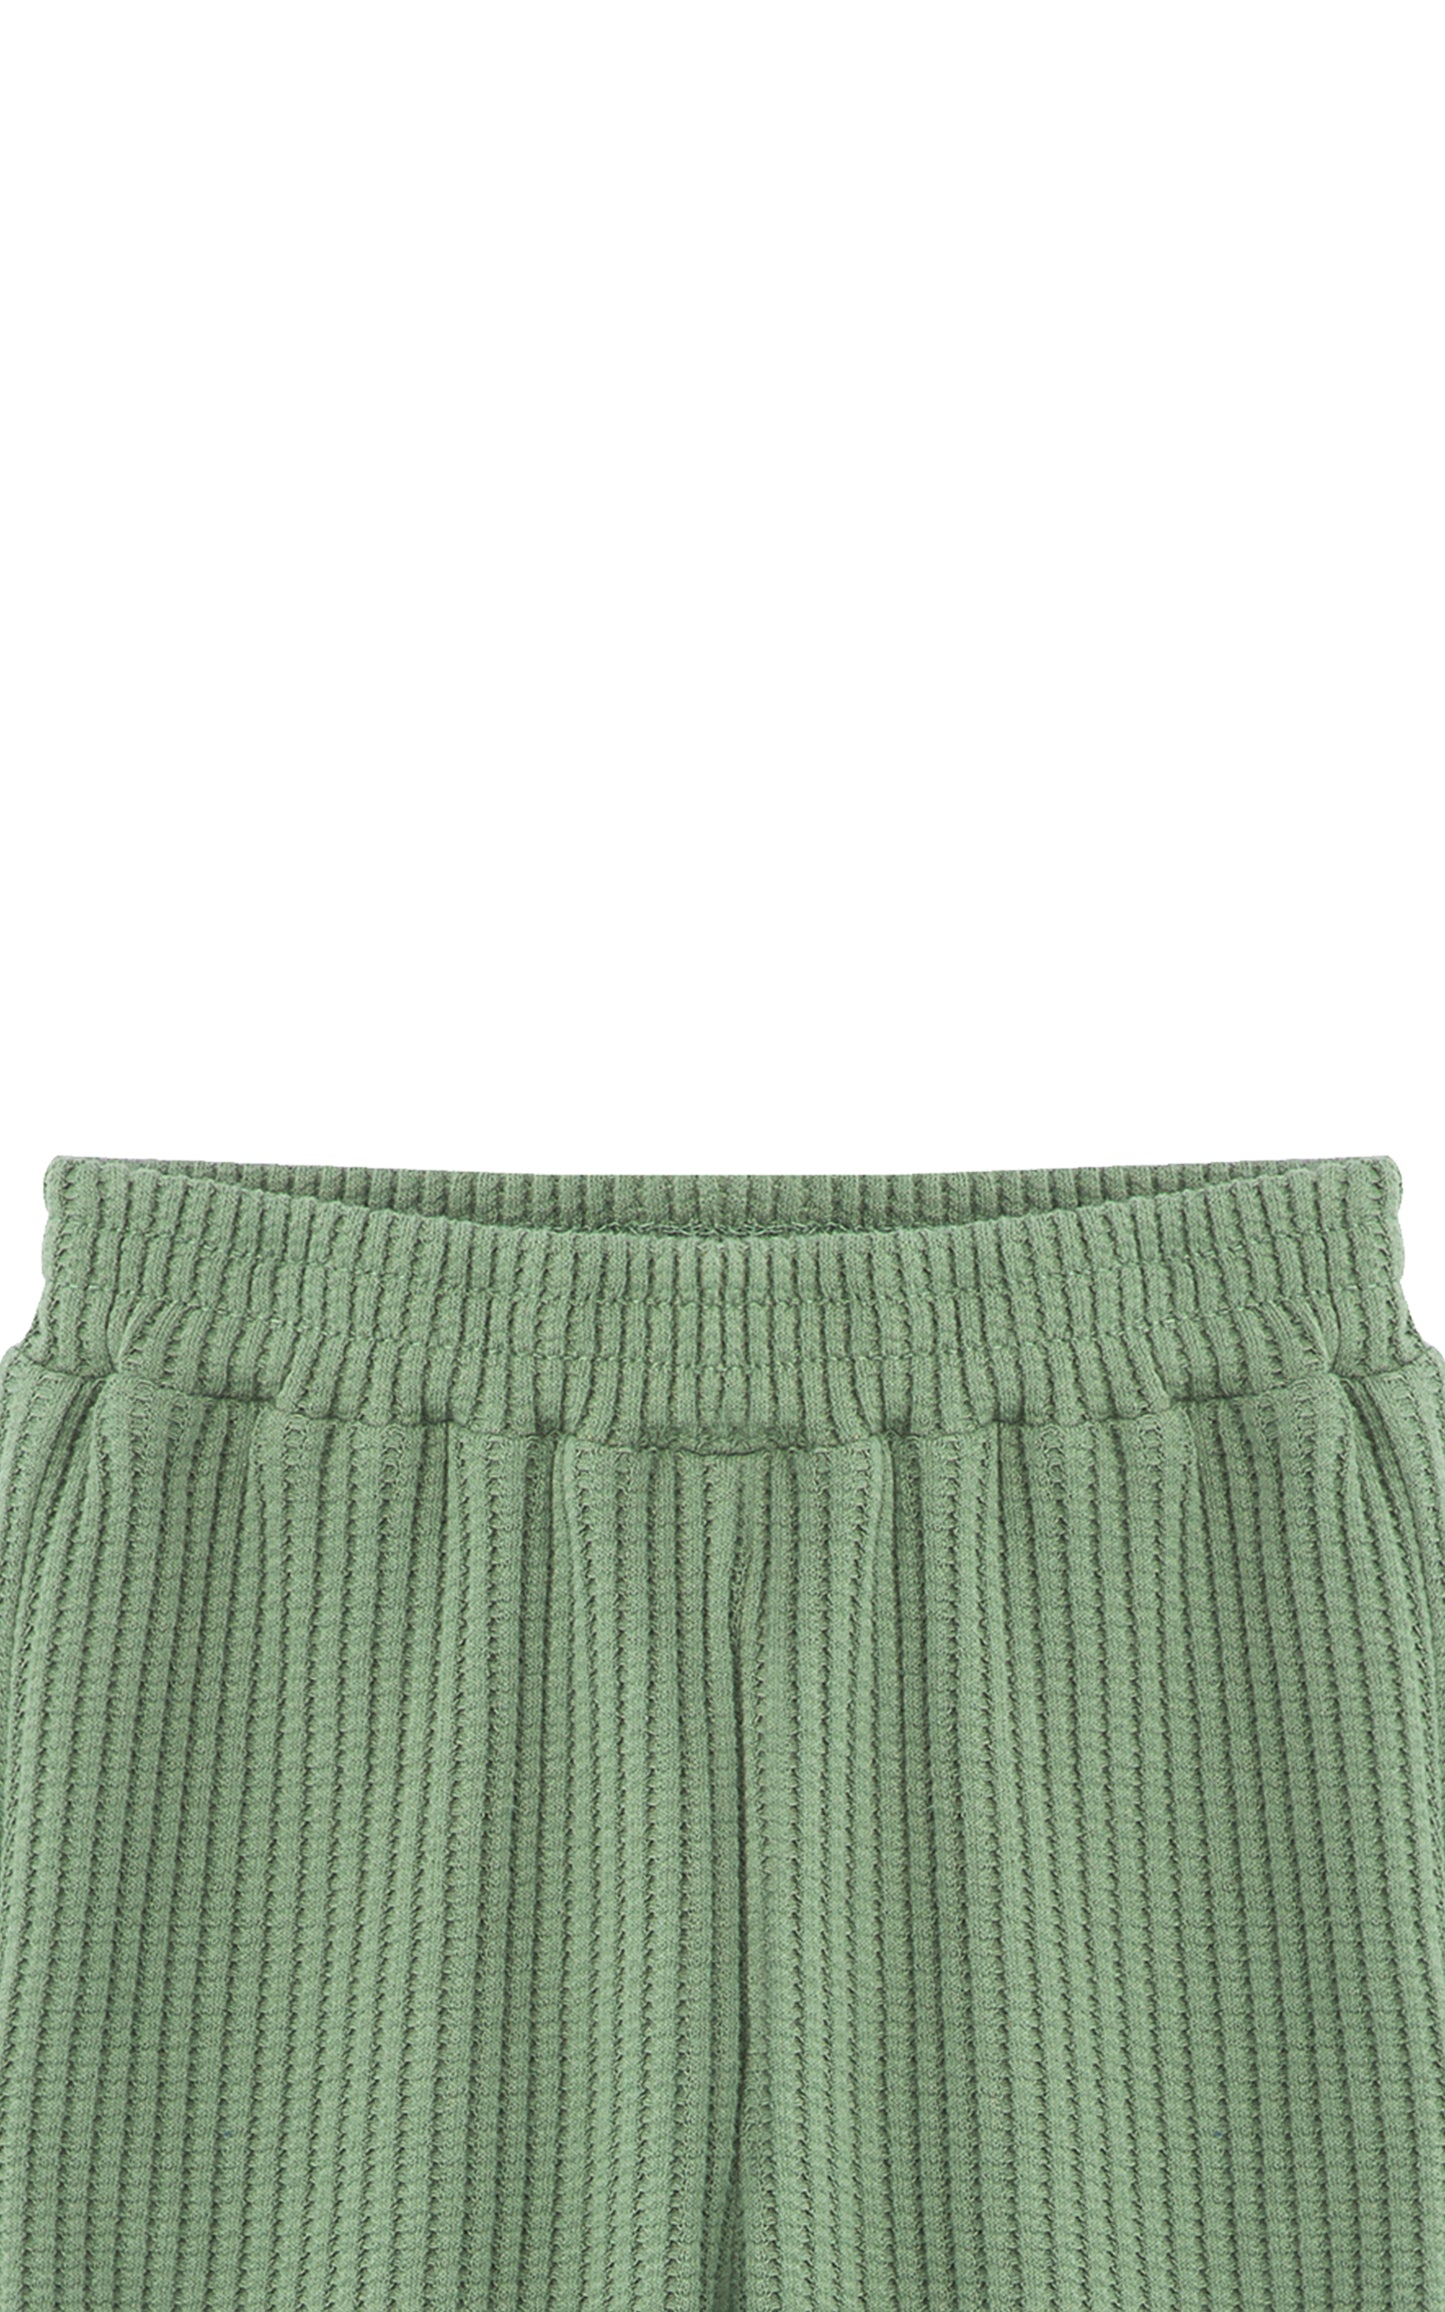 Front view of green textured knit pant